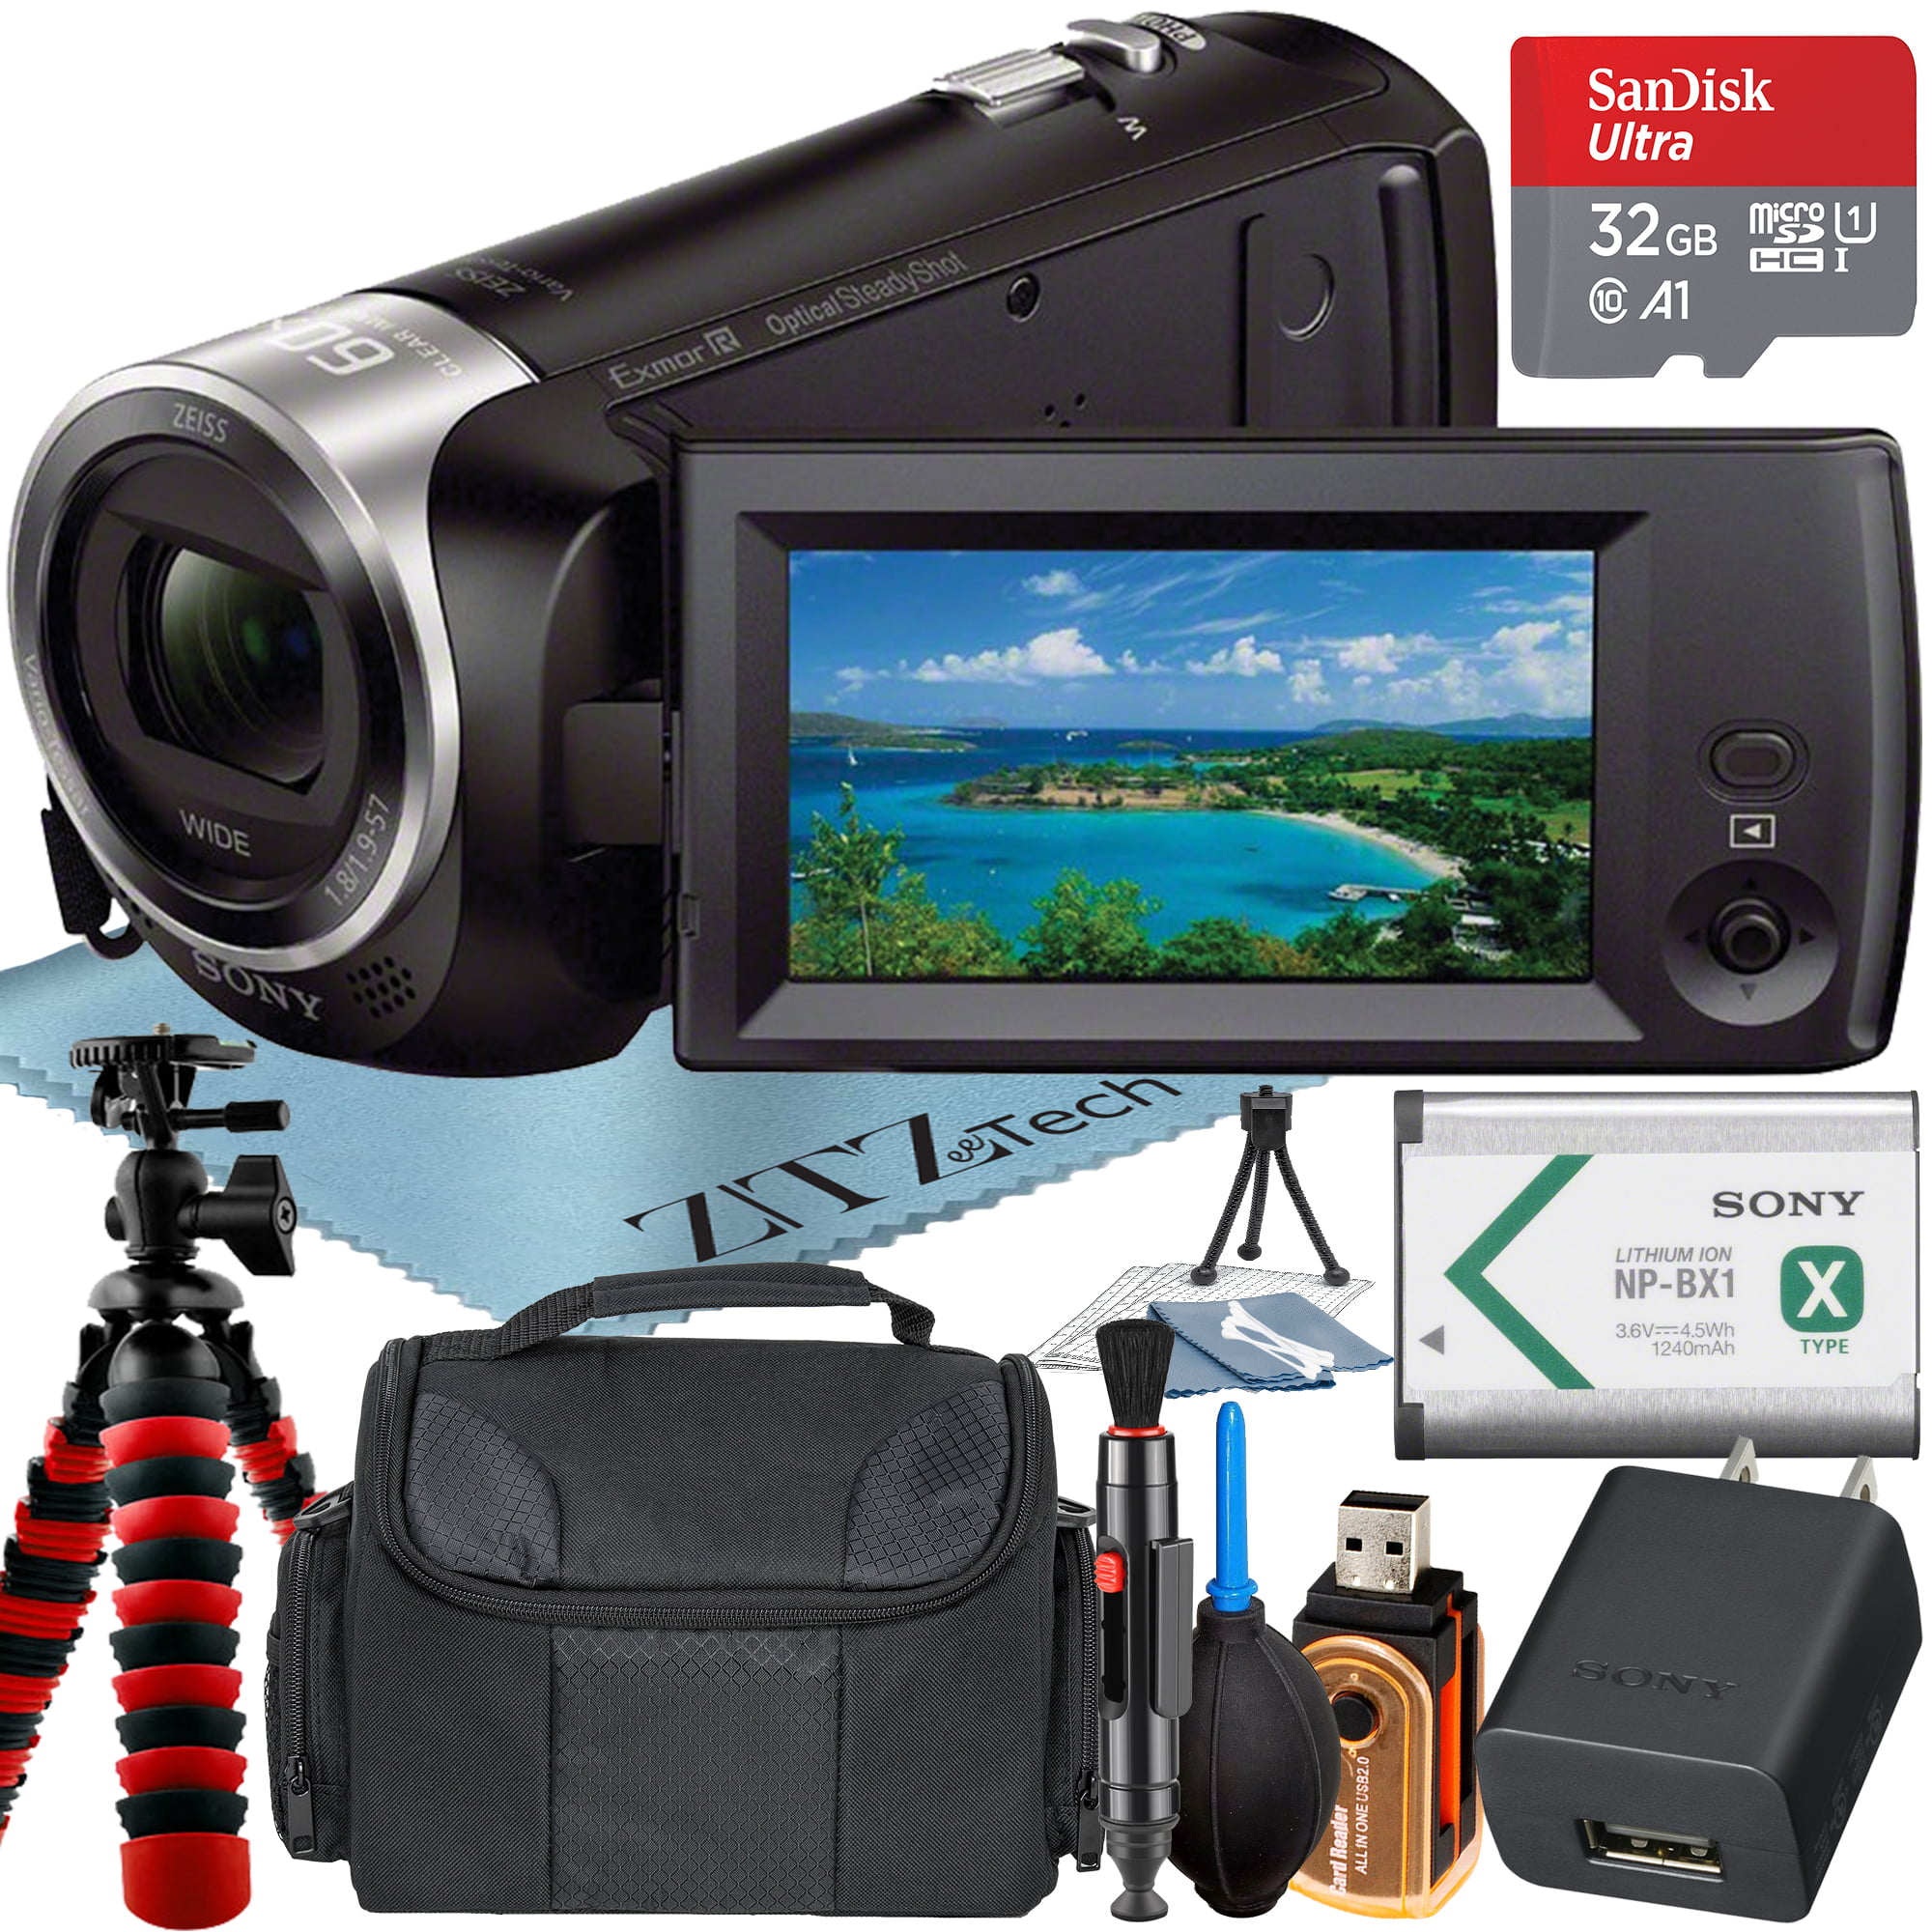 Sony HDR-CX405 HD Handycam Camcorder Video Recording with 32GB Micro SD Memory Card + Case + Tripod + ZeeTech Accessory Bundle